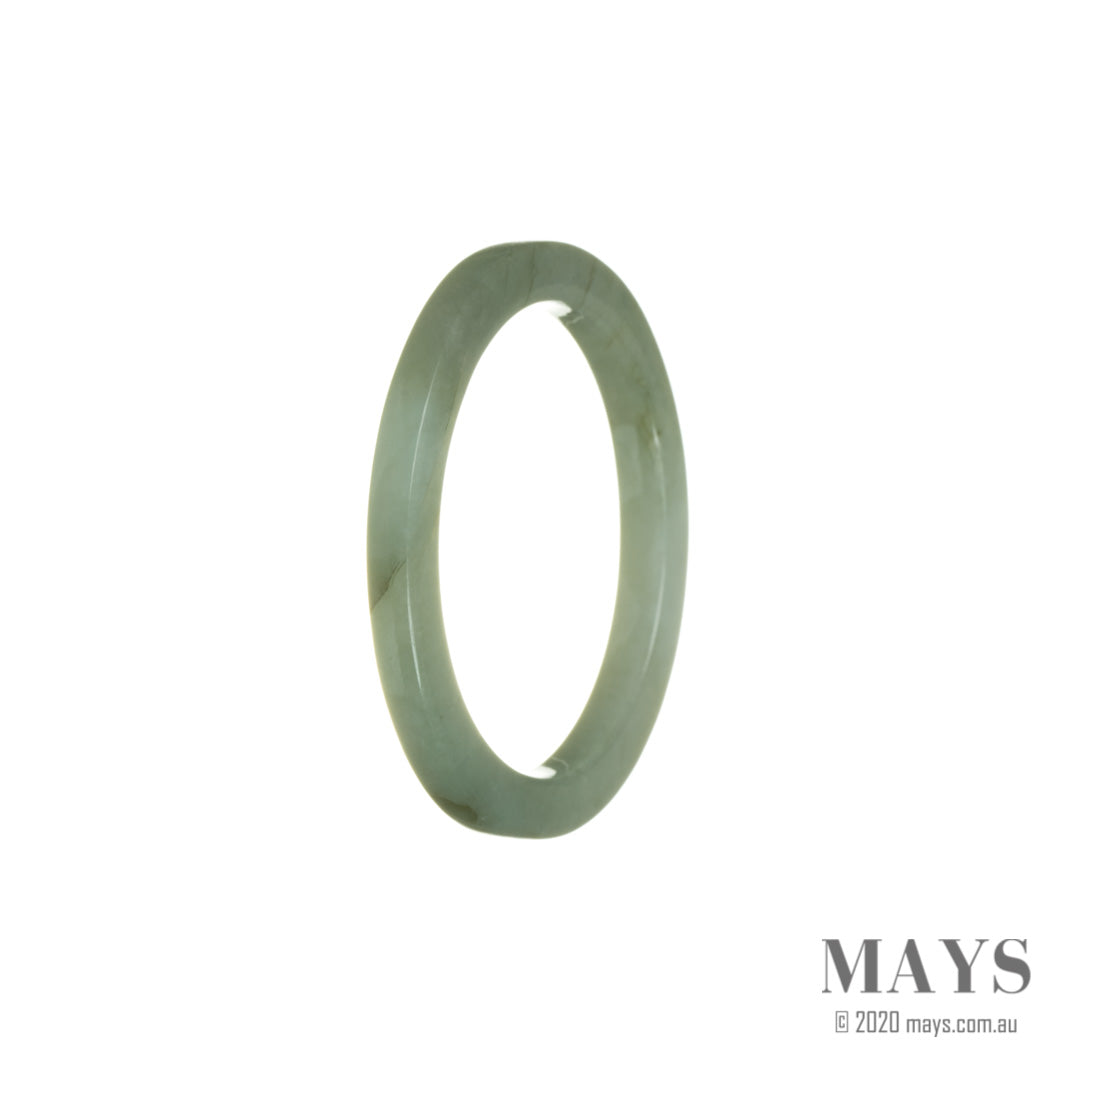 An oval-shaped, 53mm Authentic Grade A Green Burma Jade Bangle from MAYS.